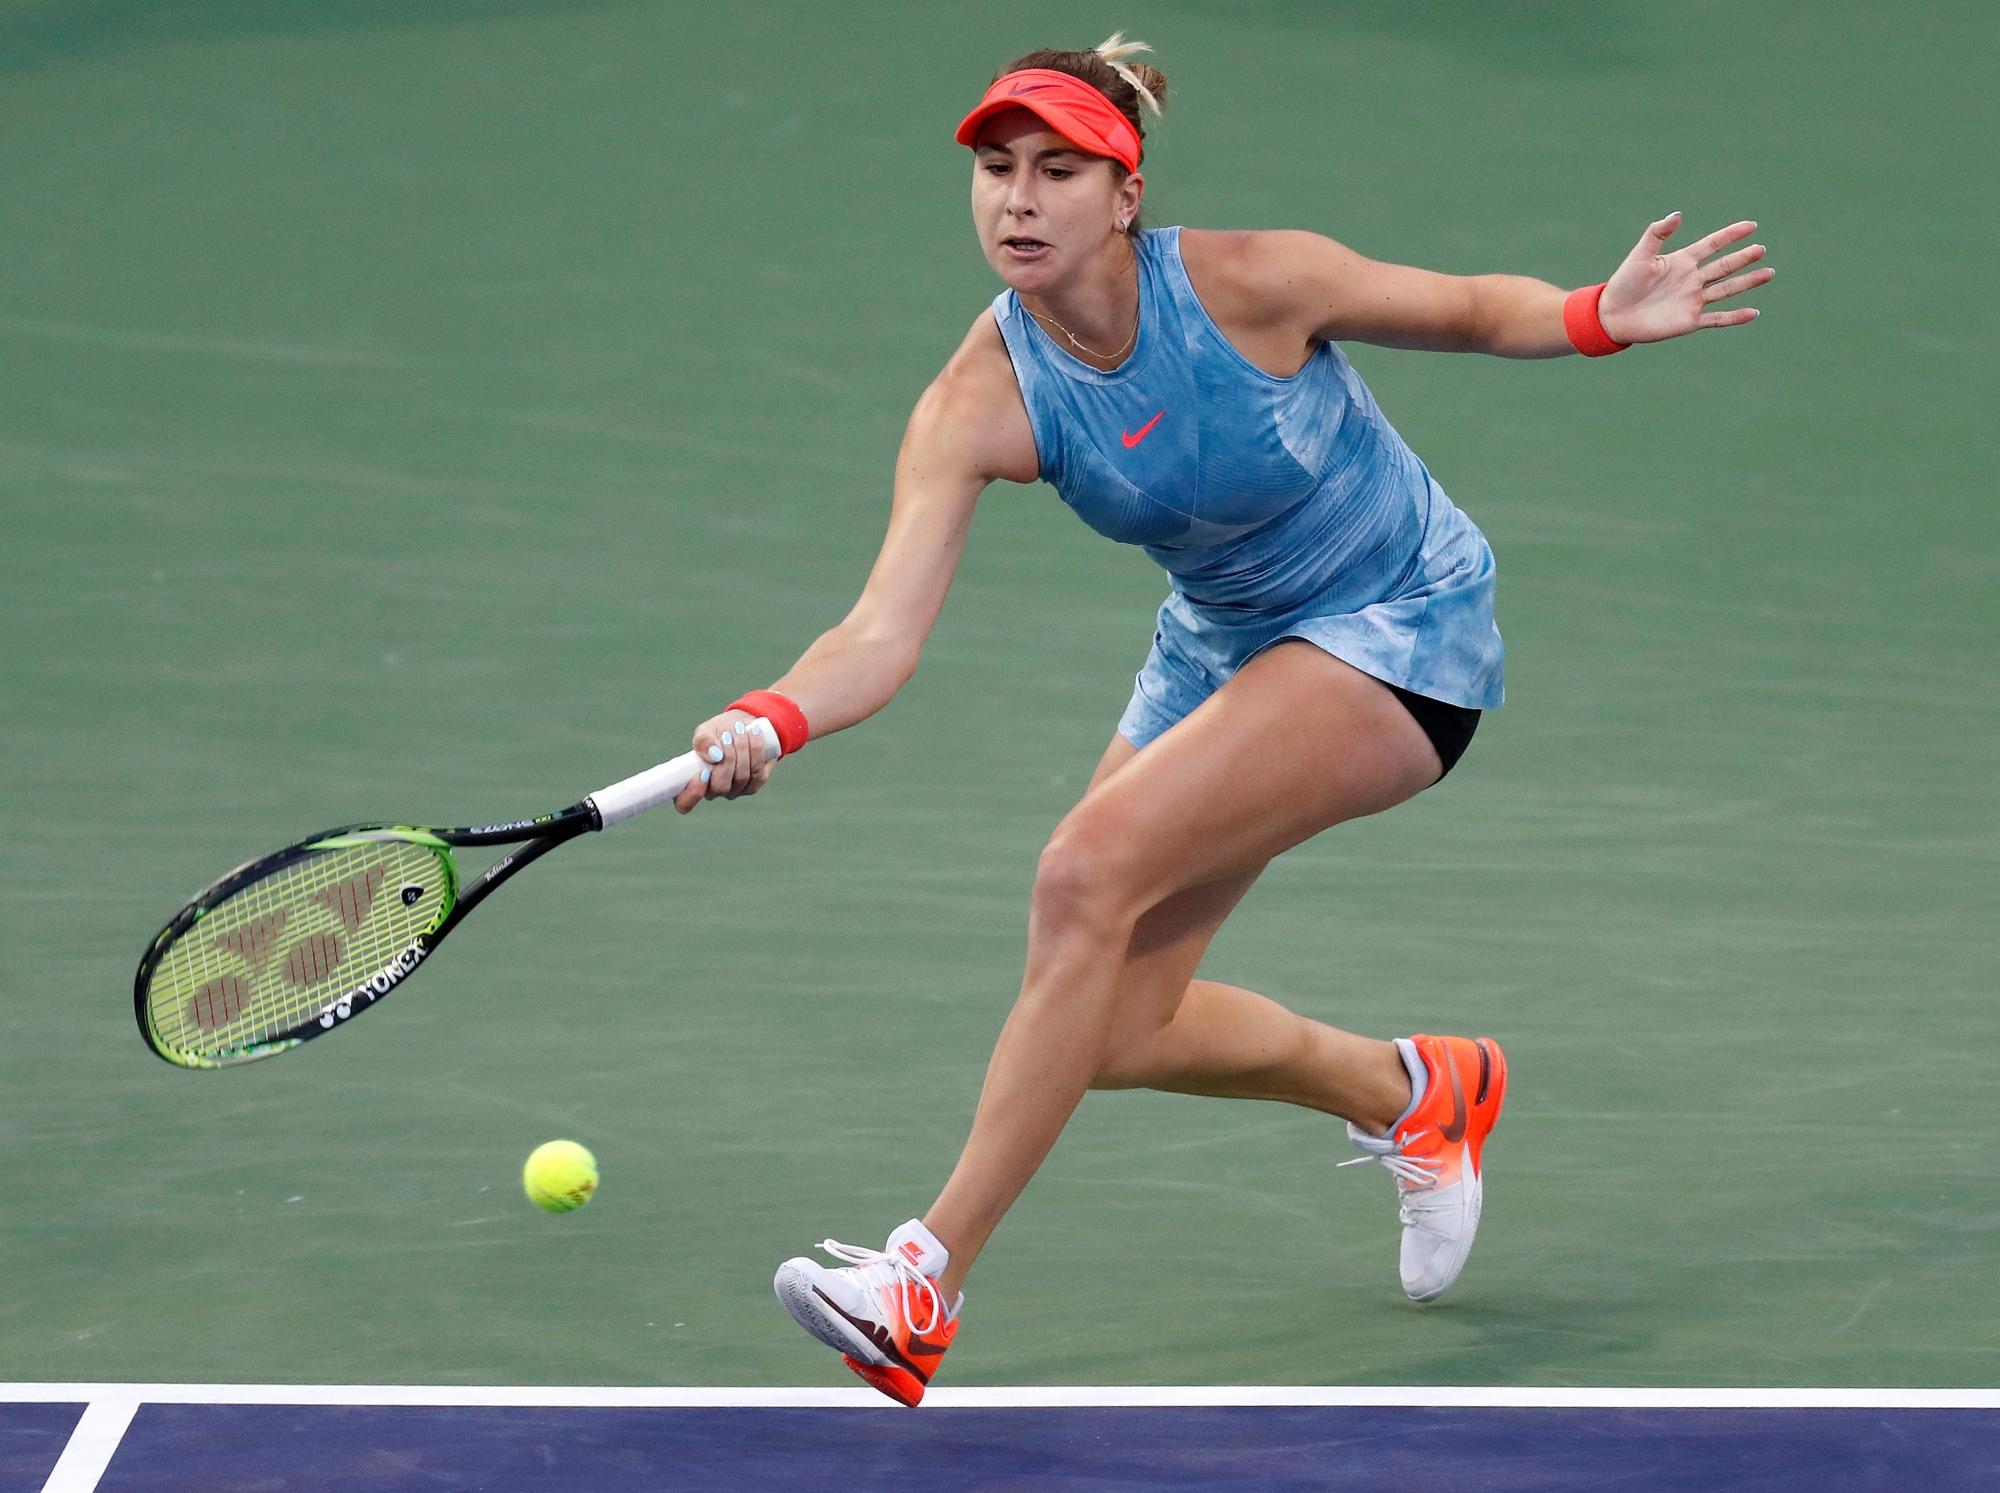 epa07432768 Belinda Bencic of Switzerland in action against Naomi Osaka of Japan during the BNP Paribas Open tennis tournament at the Indian Wells Tennis Garden in Indian Wells, California, USA, 12 March 2019. The men's and women's final will be played, 17 March 2019.  EPA/JOHN G. MABANGLO USA TENNIS BNP PARIBAS OPEN